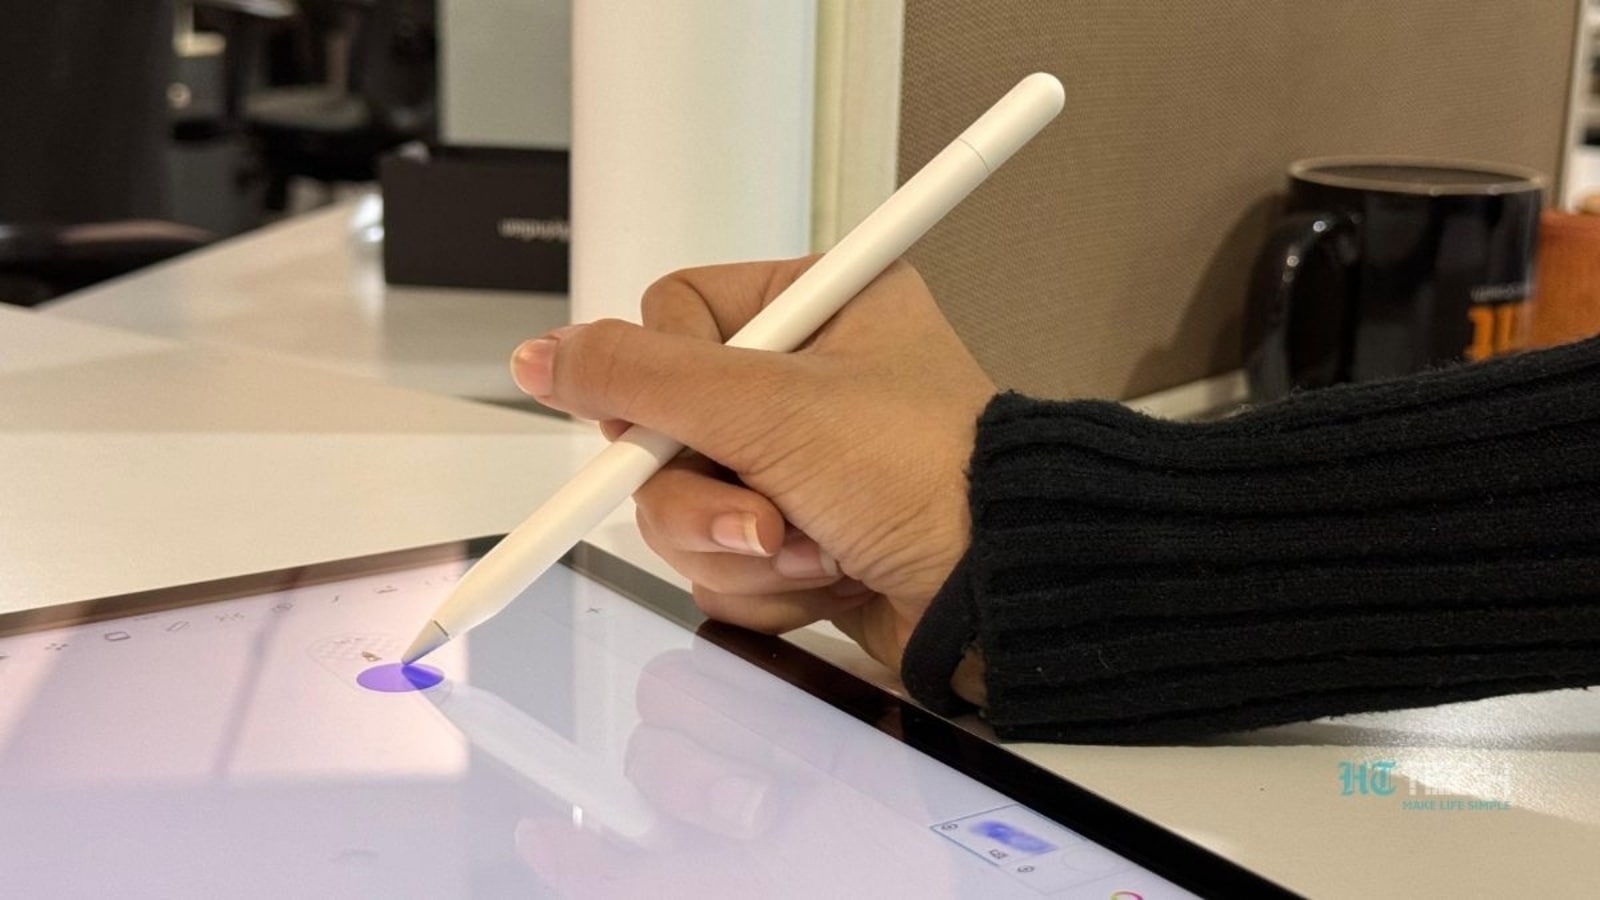 Apple CEO Tim Prepare dinner dinner teases ‘Pencil 3’ along with new iPads upfront of Could maybe 7 distinctive operate